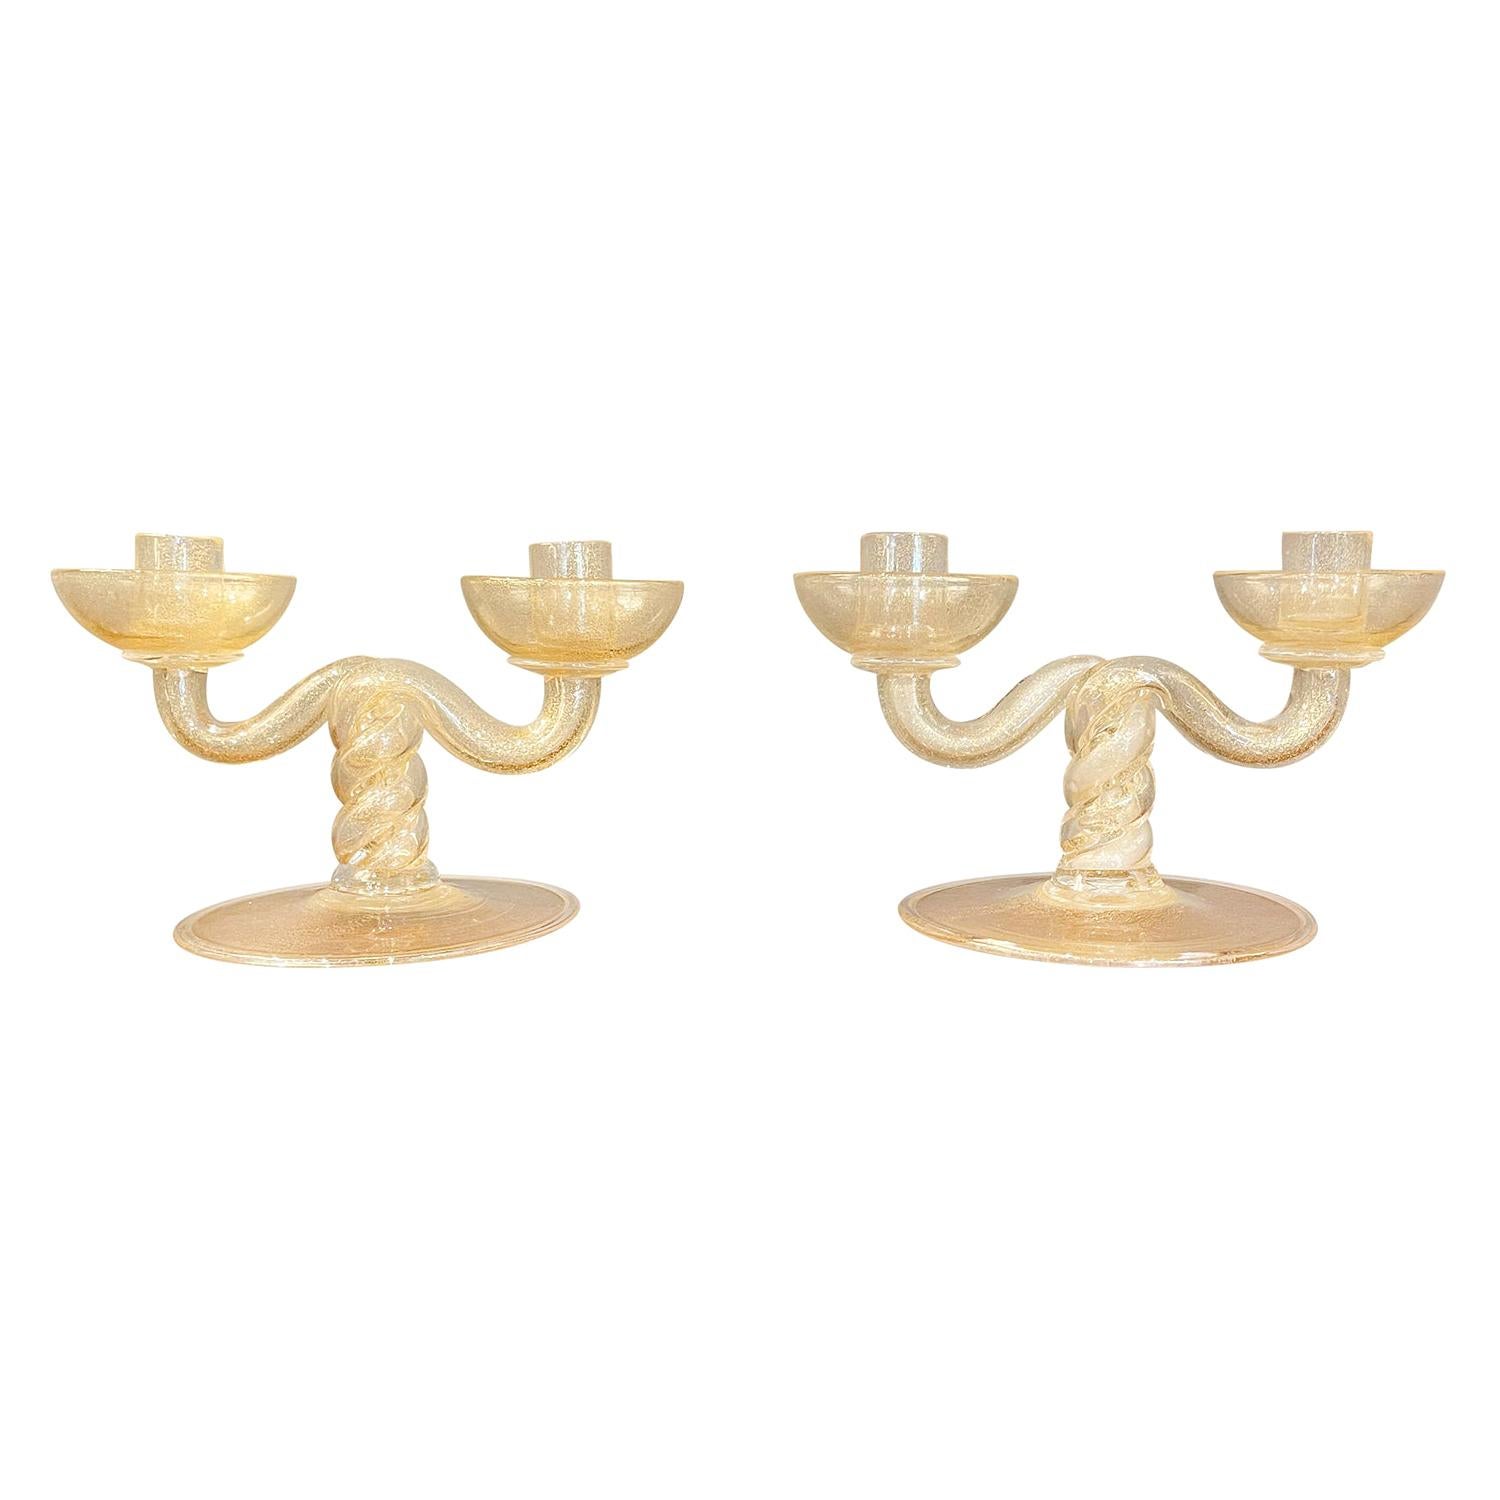 20th Century Italian Pair of Murano Glass Candle Holders by Barovier & Toso